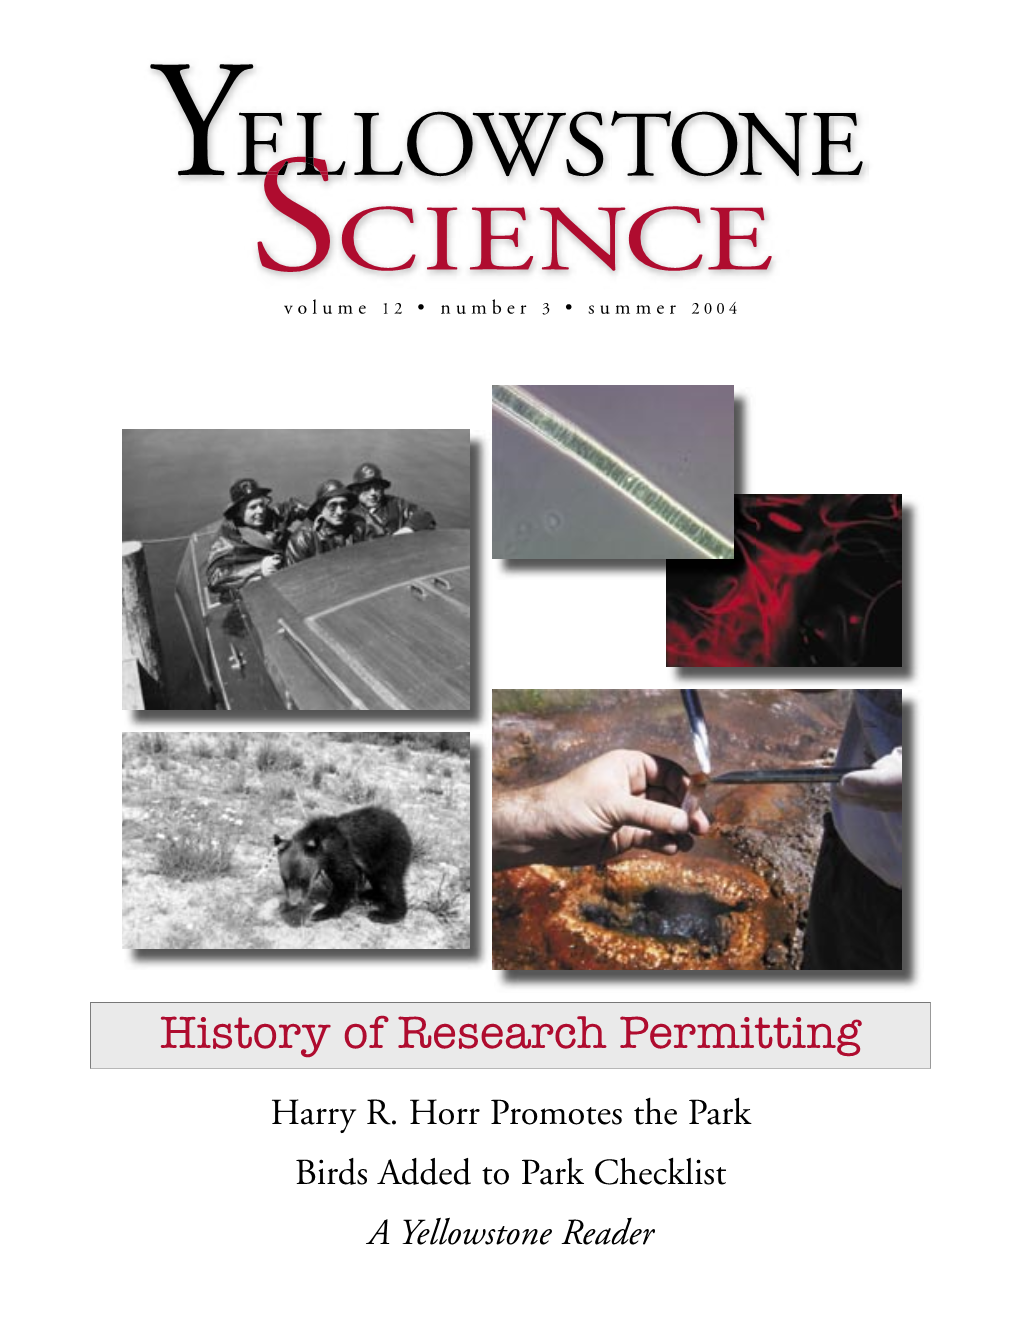 Yellowstone Science Is Published Quarterly